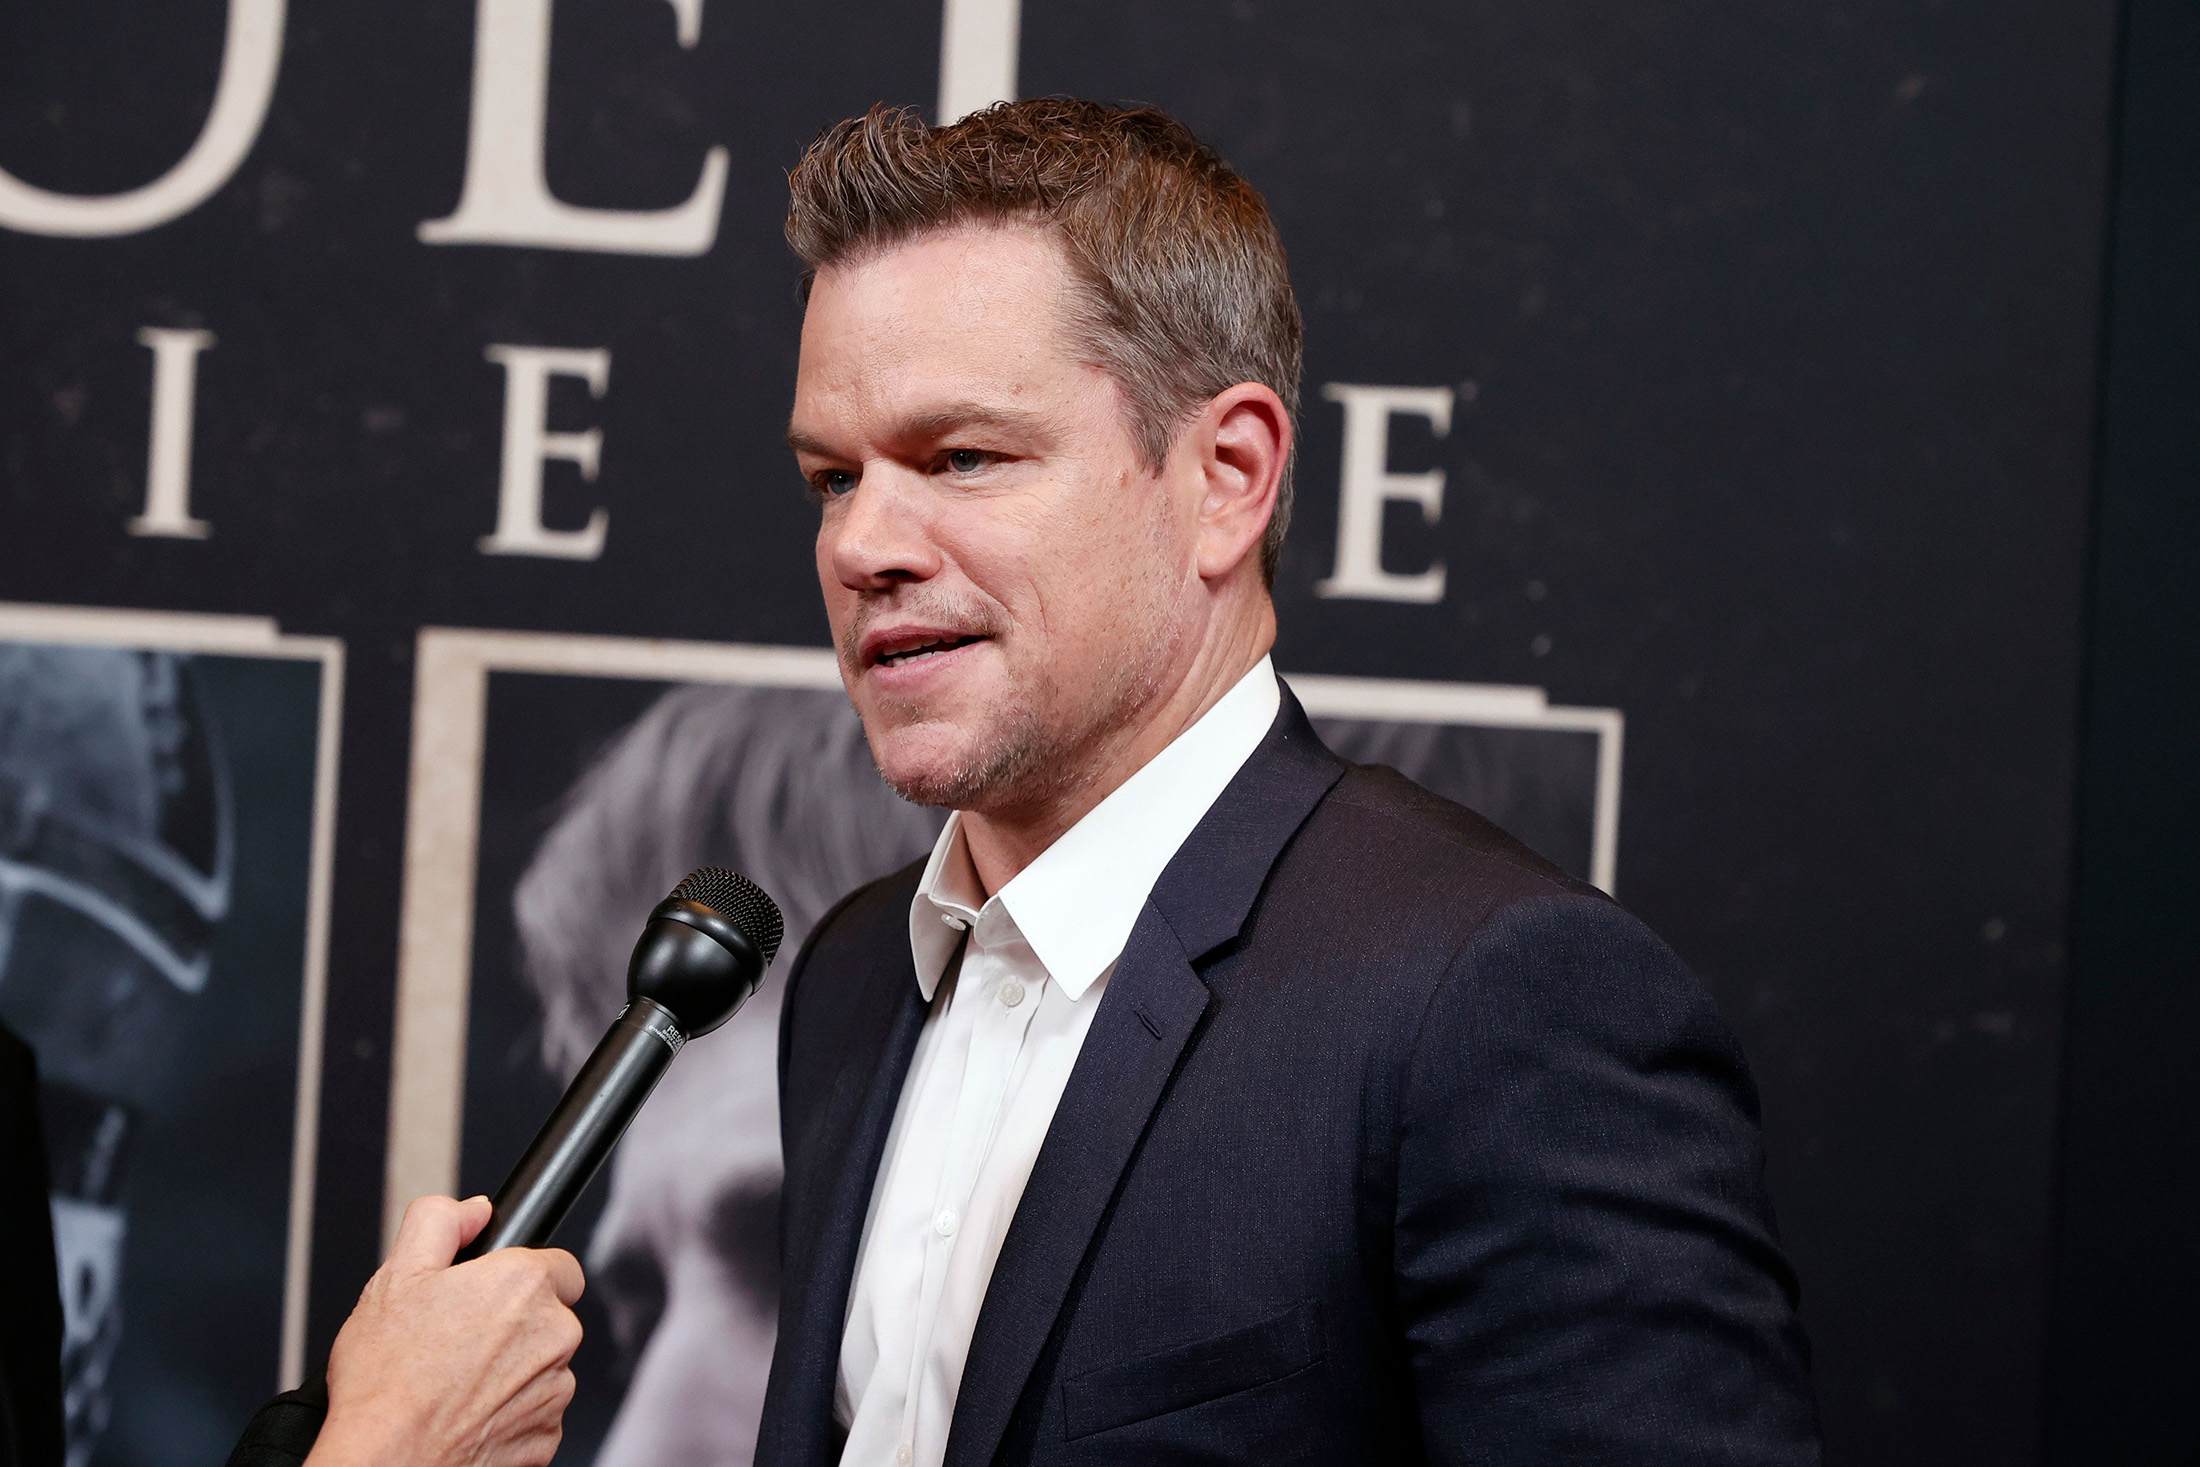 how much did matt damon get paid for crypto